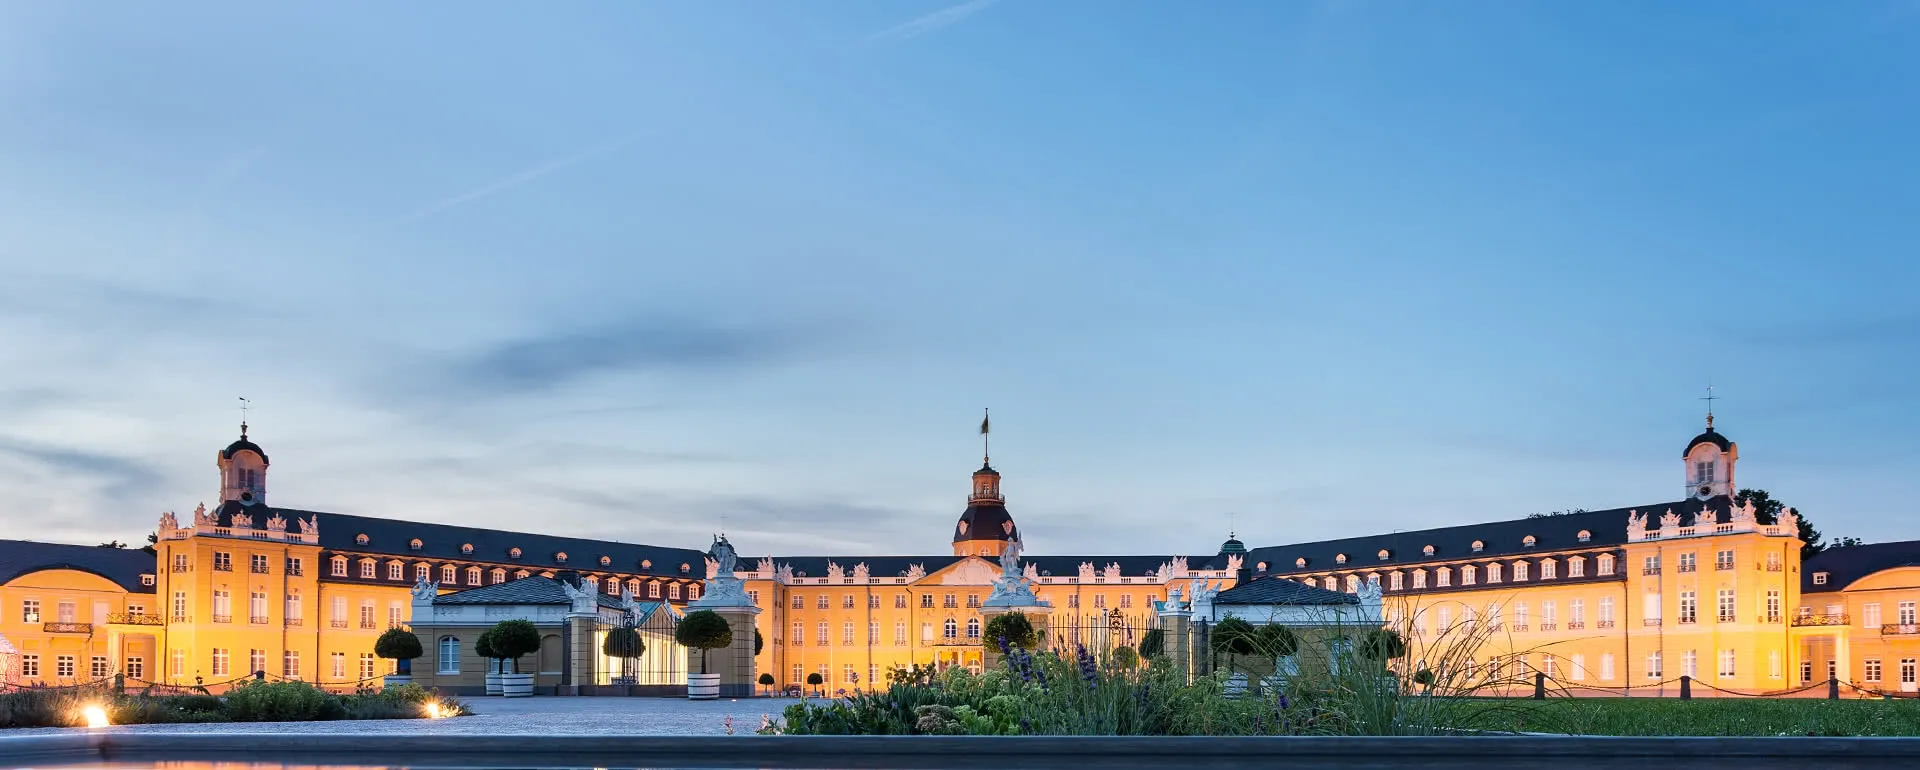 Karlsruhe - the destination for exhibition hotels